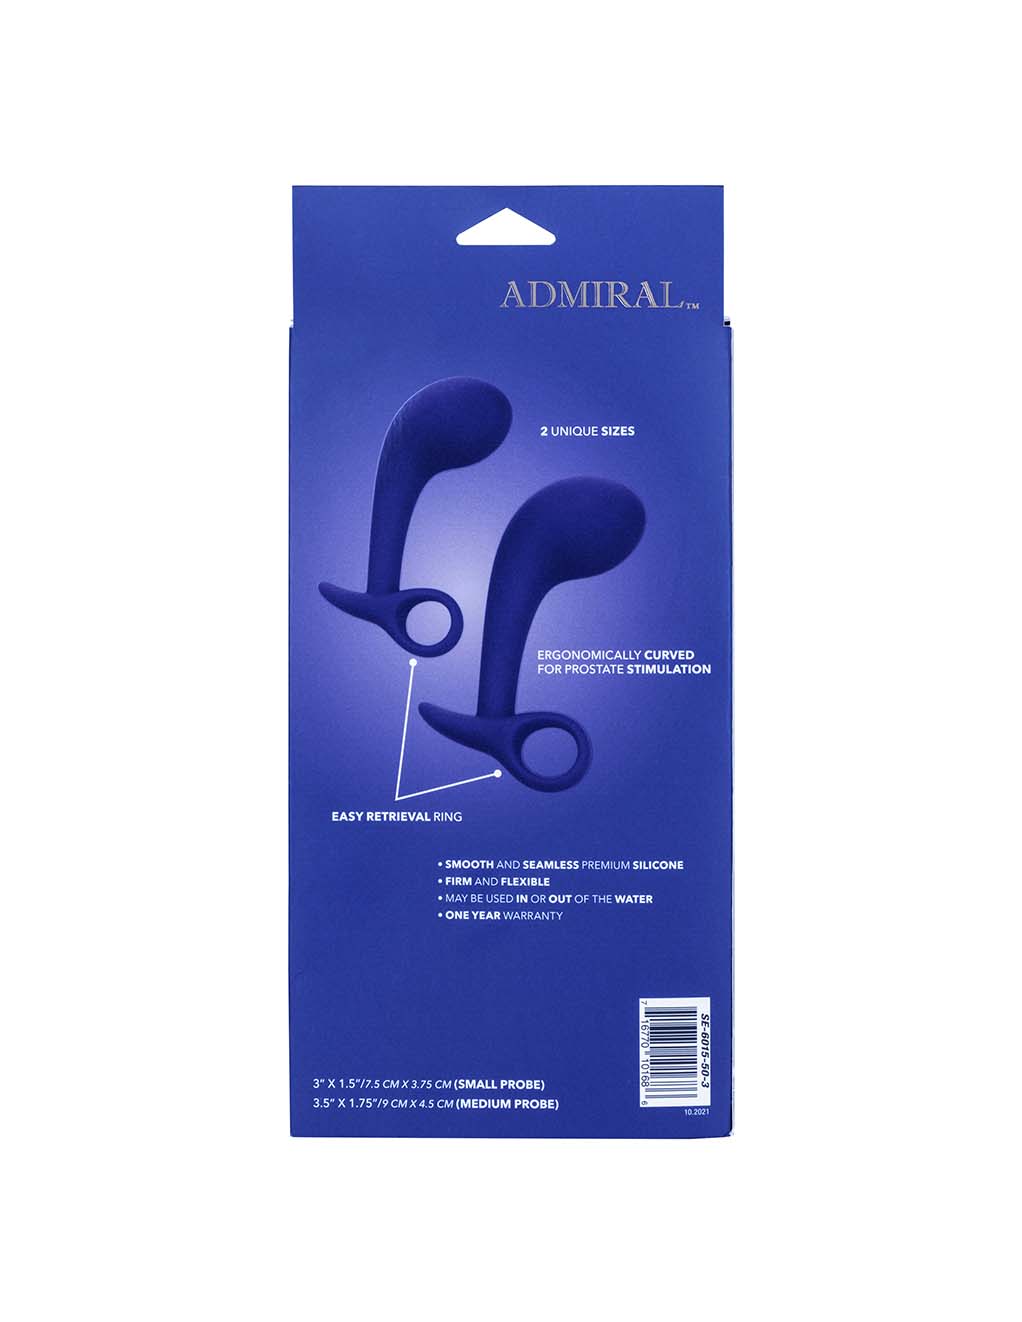 Admiral Silicone Anal Training Set- Box Back